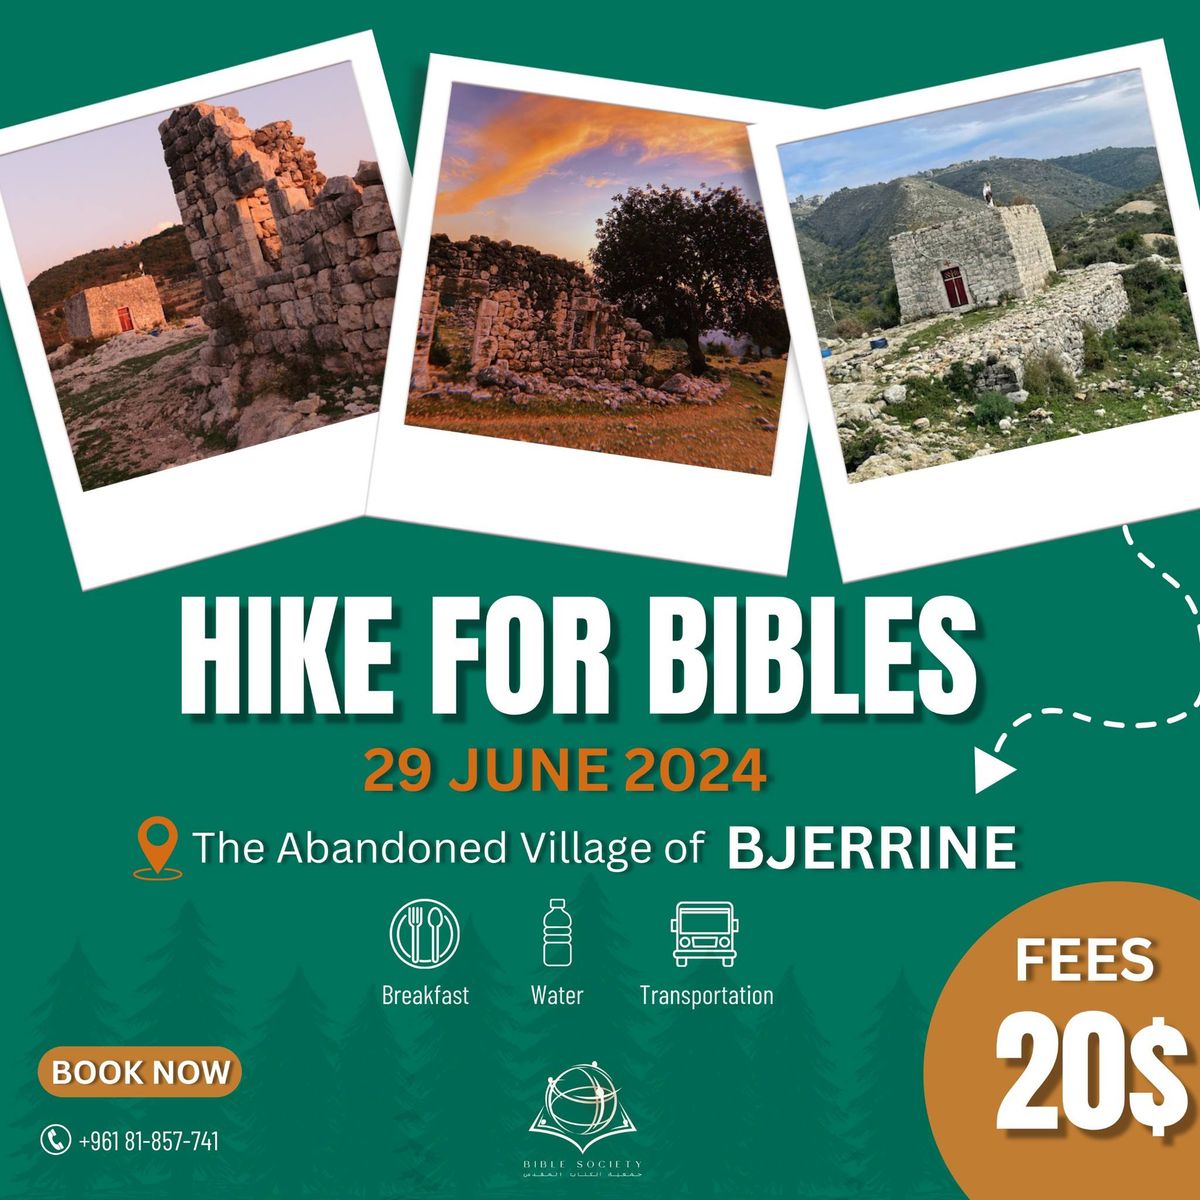 Hike for Bibles